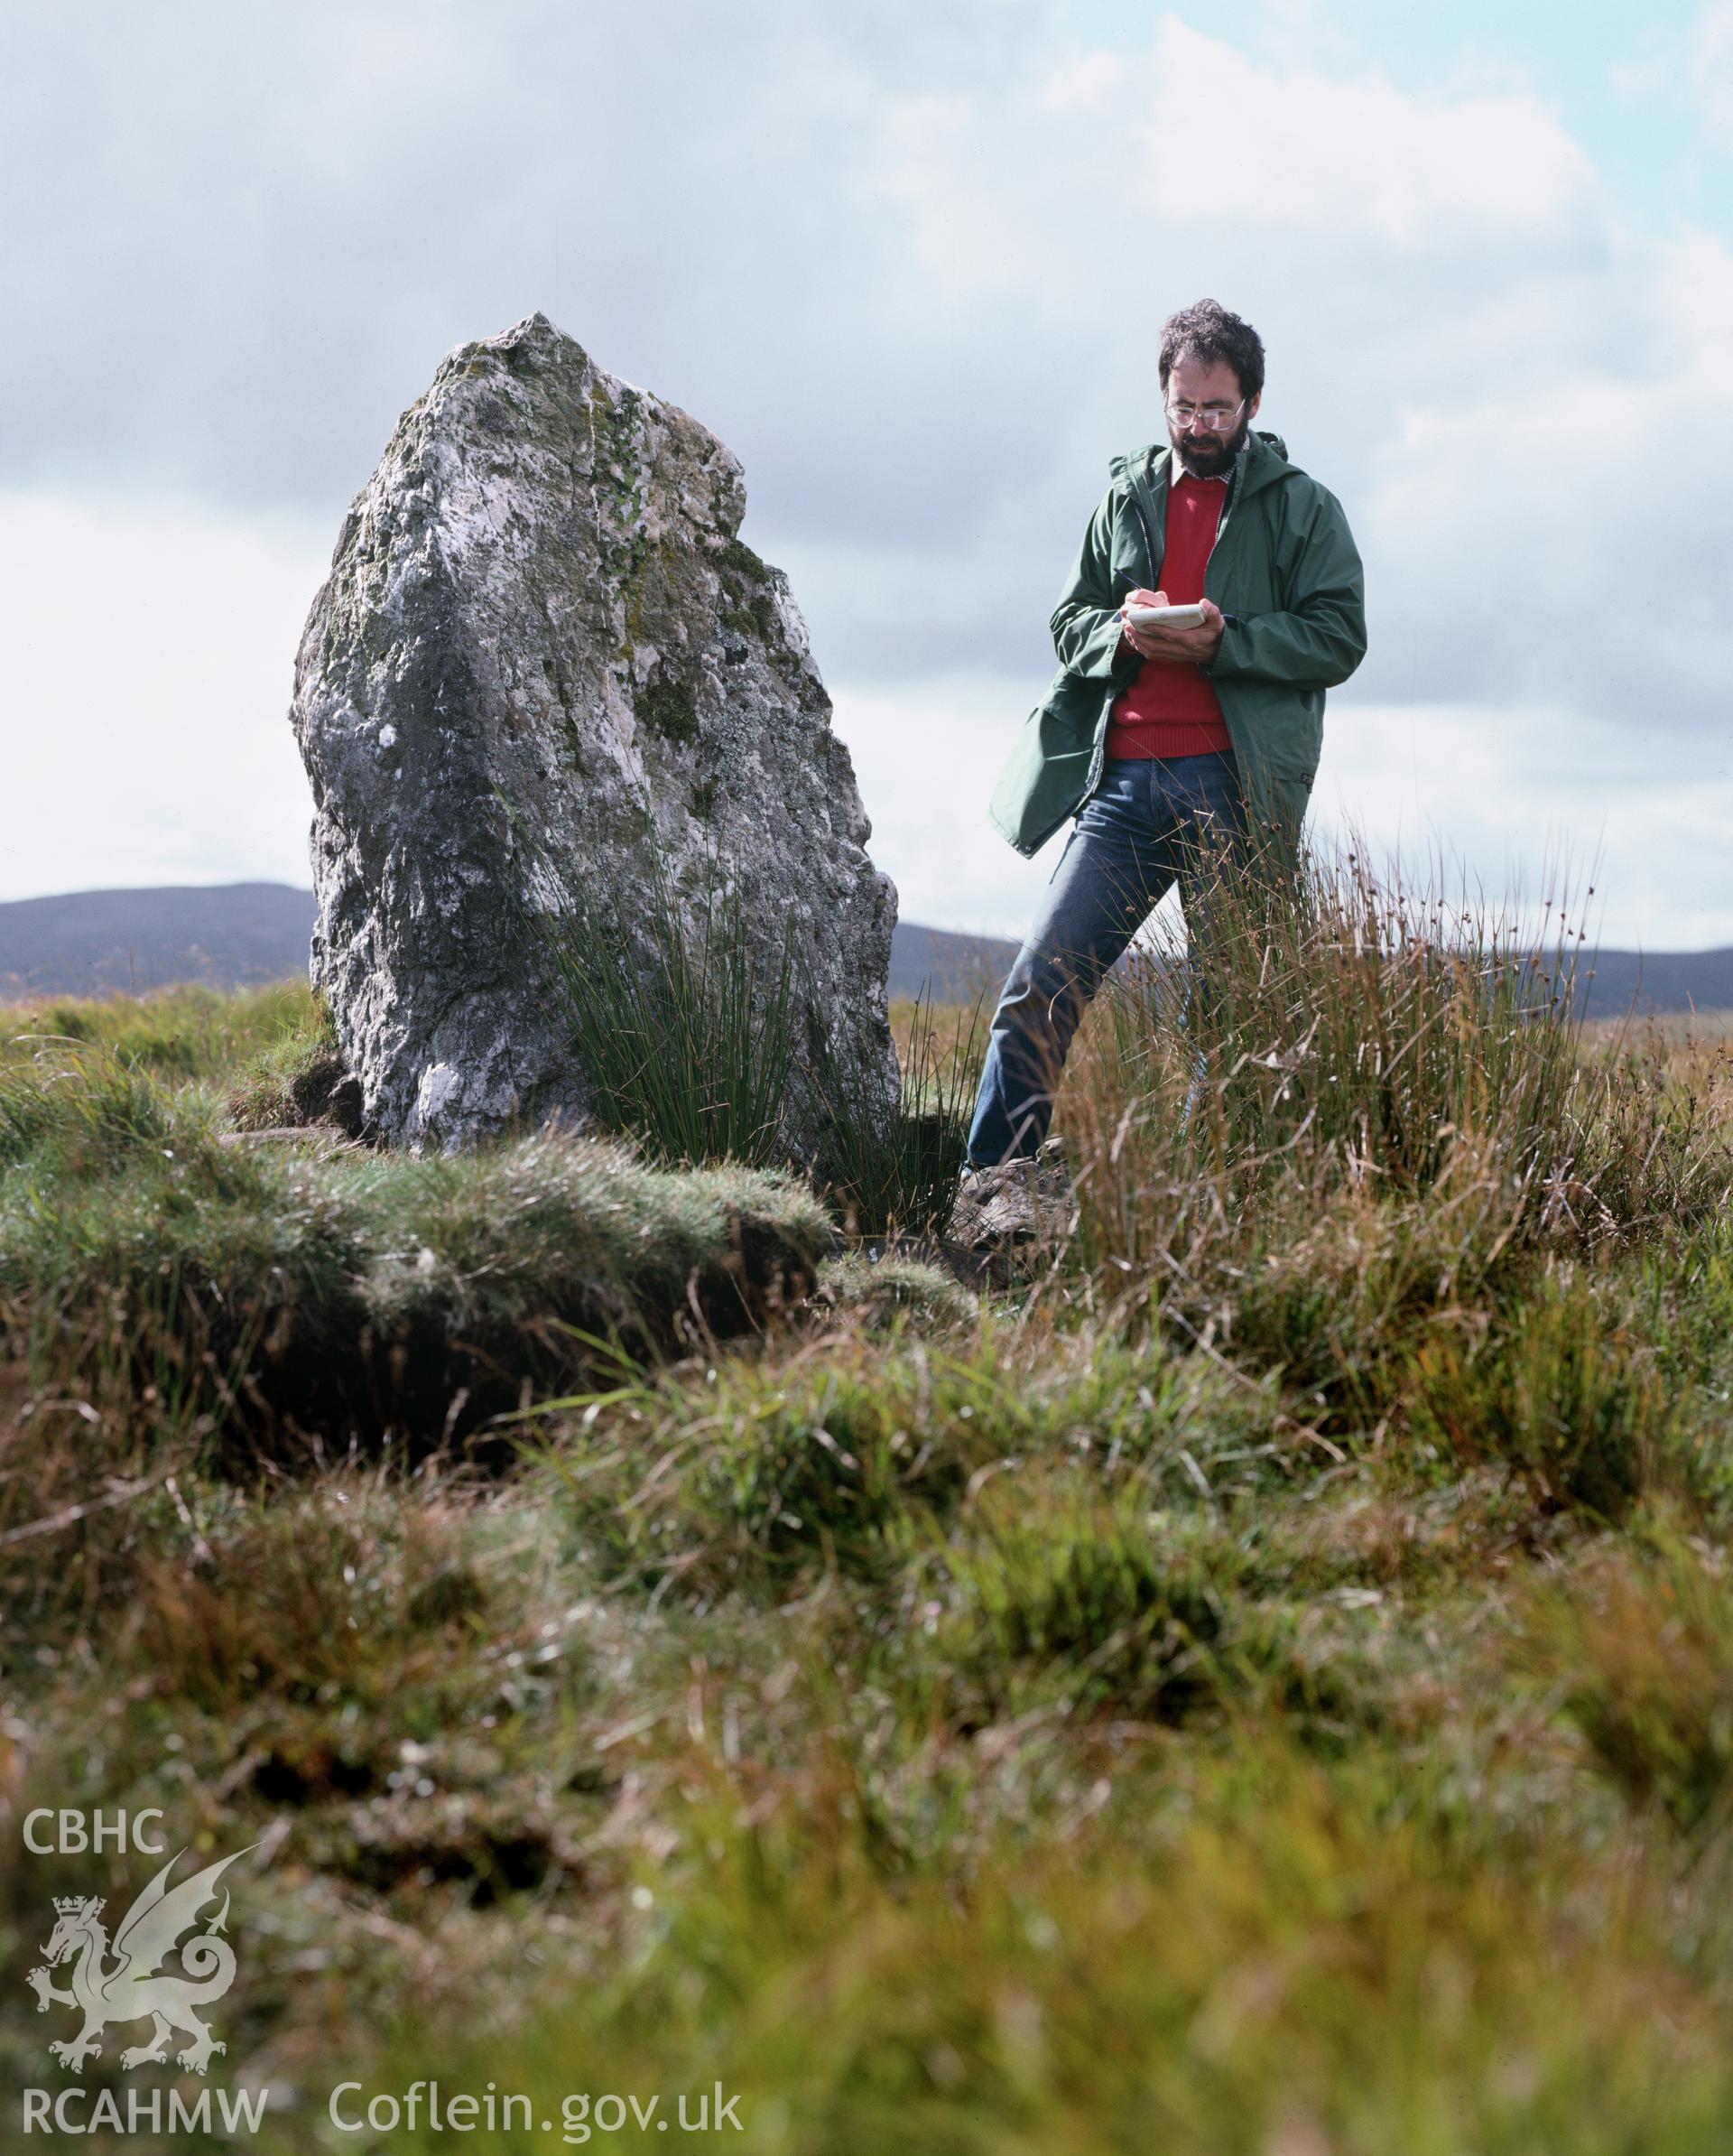 Colour transparency showing a view of Maen Lydan Standing Stone, produced by Iain Wright, c.1981.